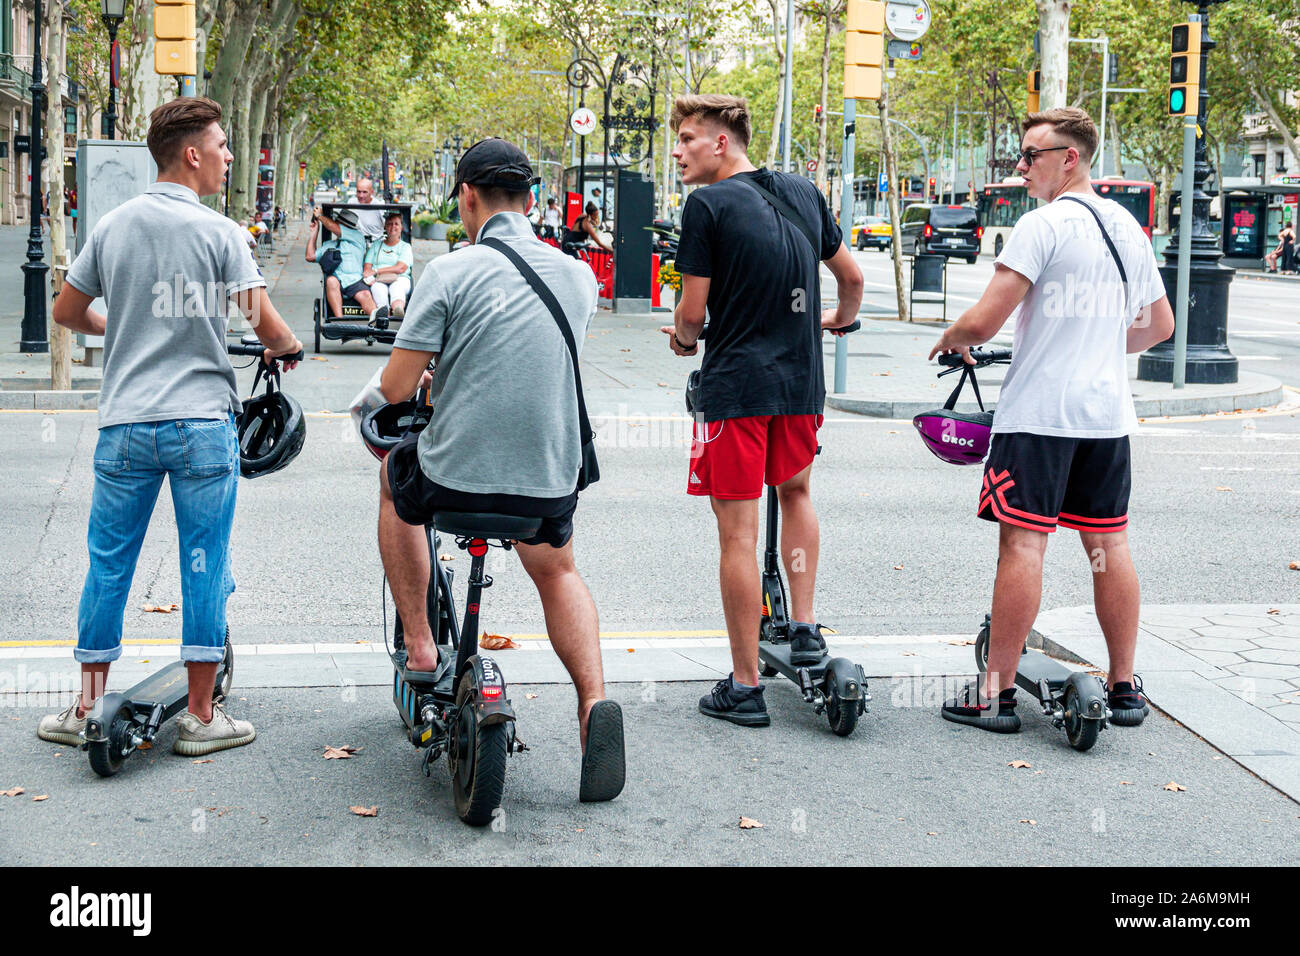 Barcelona Spain,Catalonia Passeig de Gracia,shopping district,wide sidewalk,street crossing,man,friends,young adults,electric step scooters,waiting fo Stock Photo